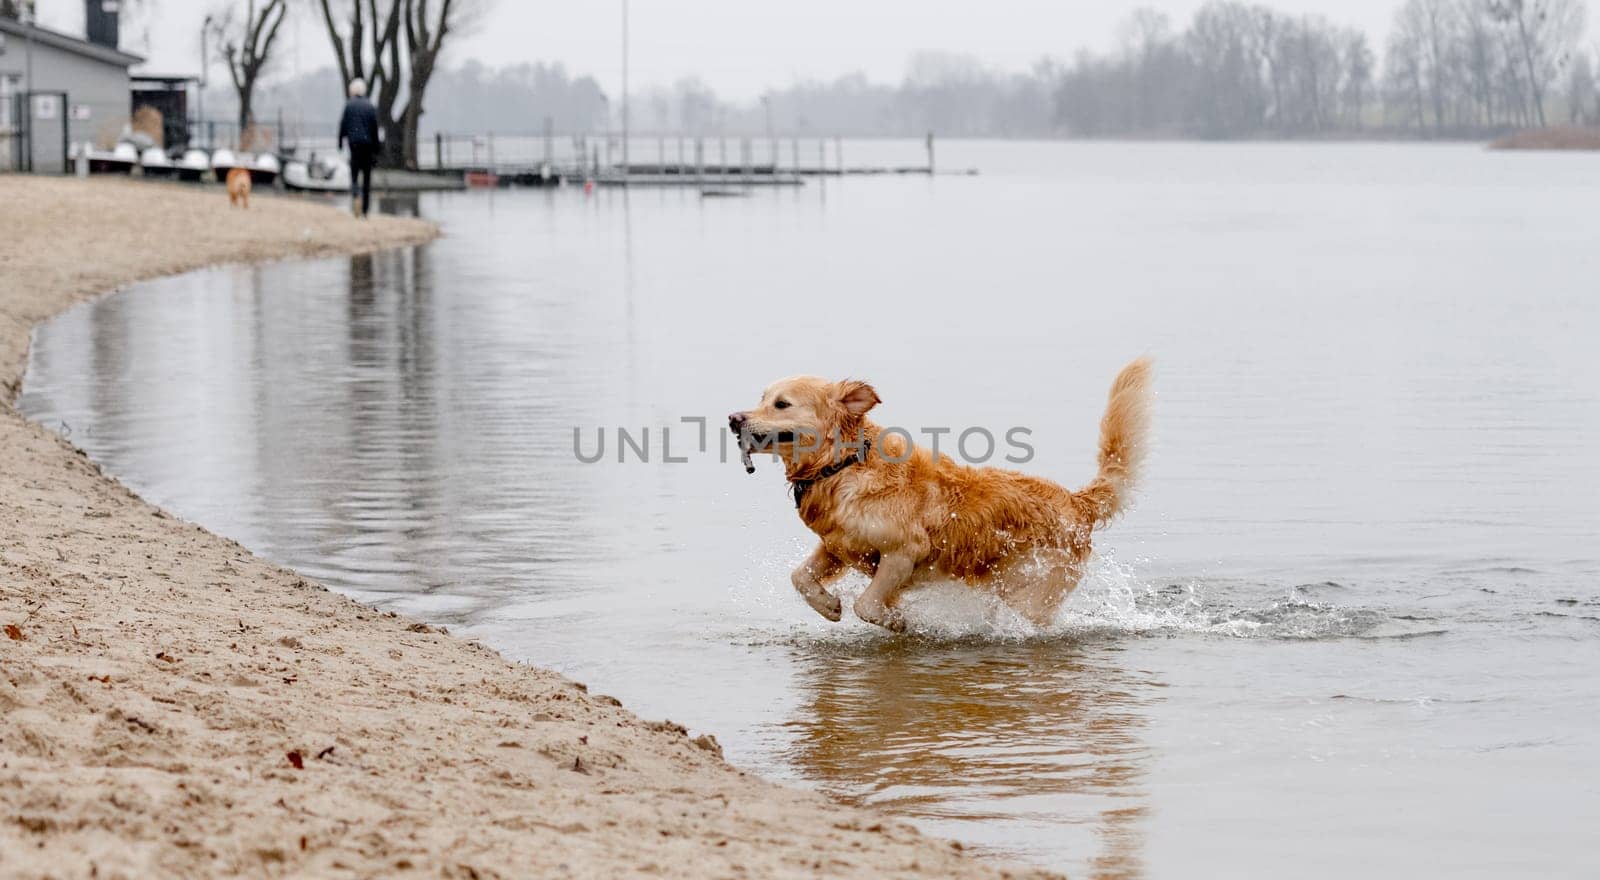 Golden Retriever Jumps Out Of Water With Stick In Teeth At Lake In Morning